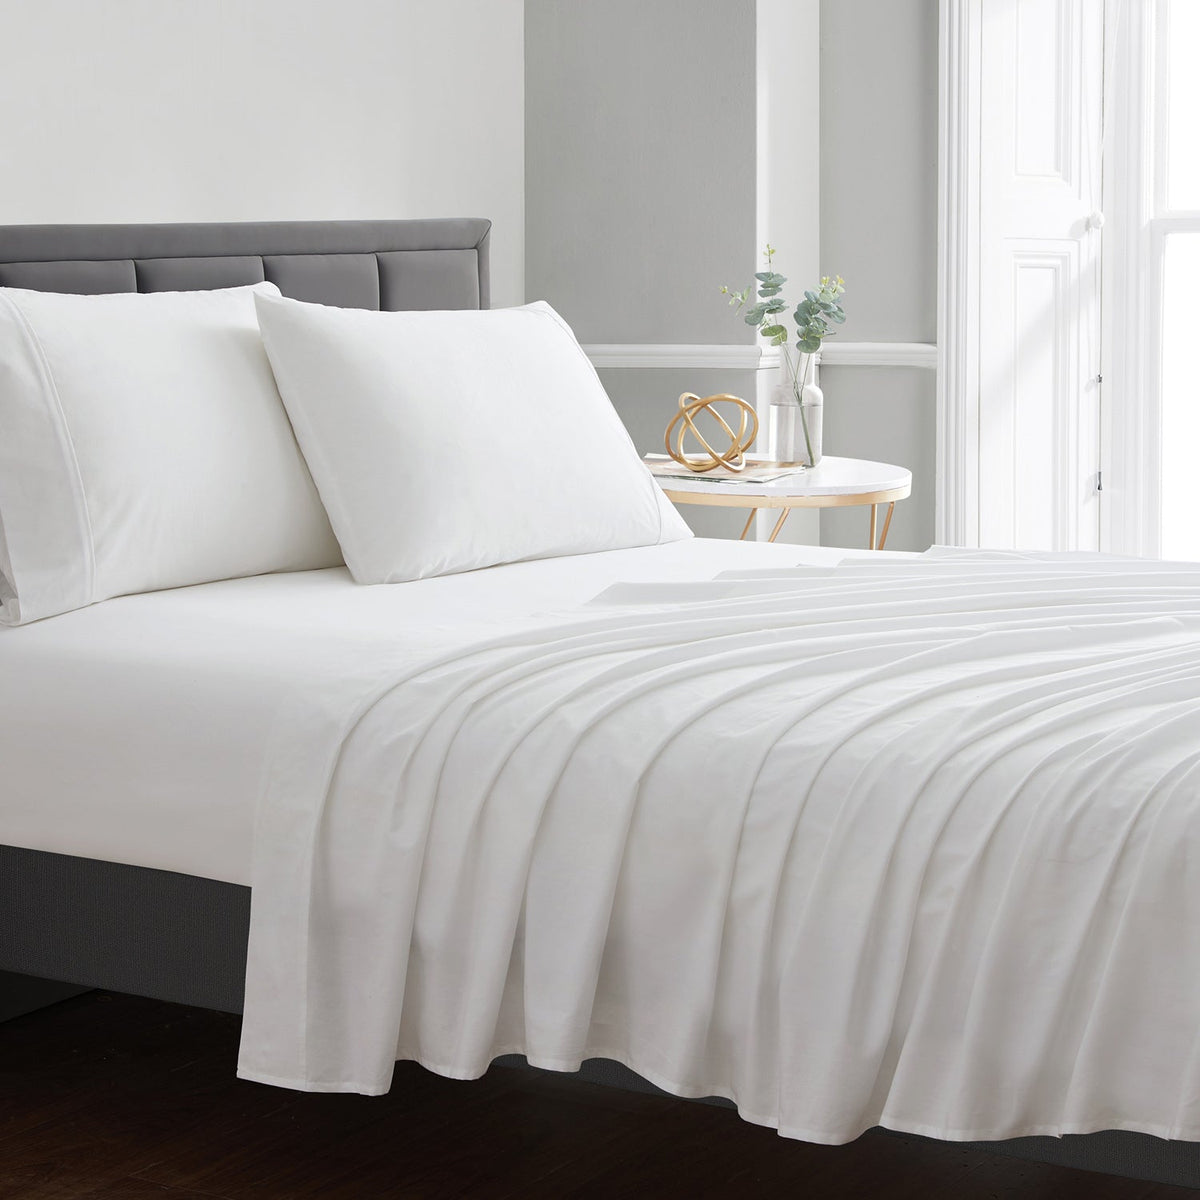 200 Thread Count Cotton 4-Piece Sheet Set Ivory - Bed